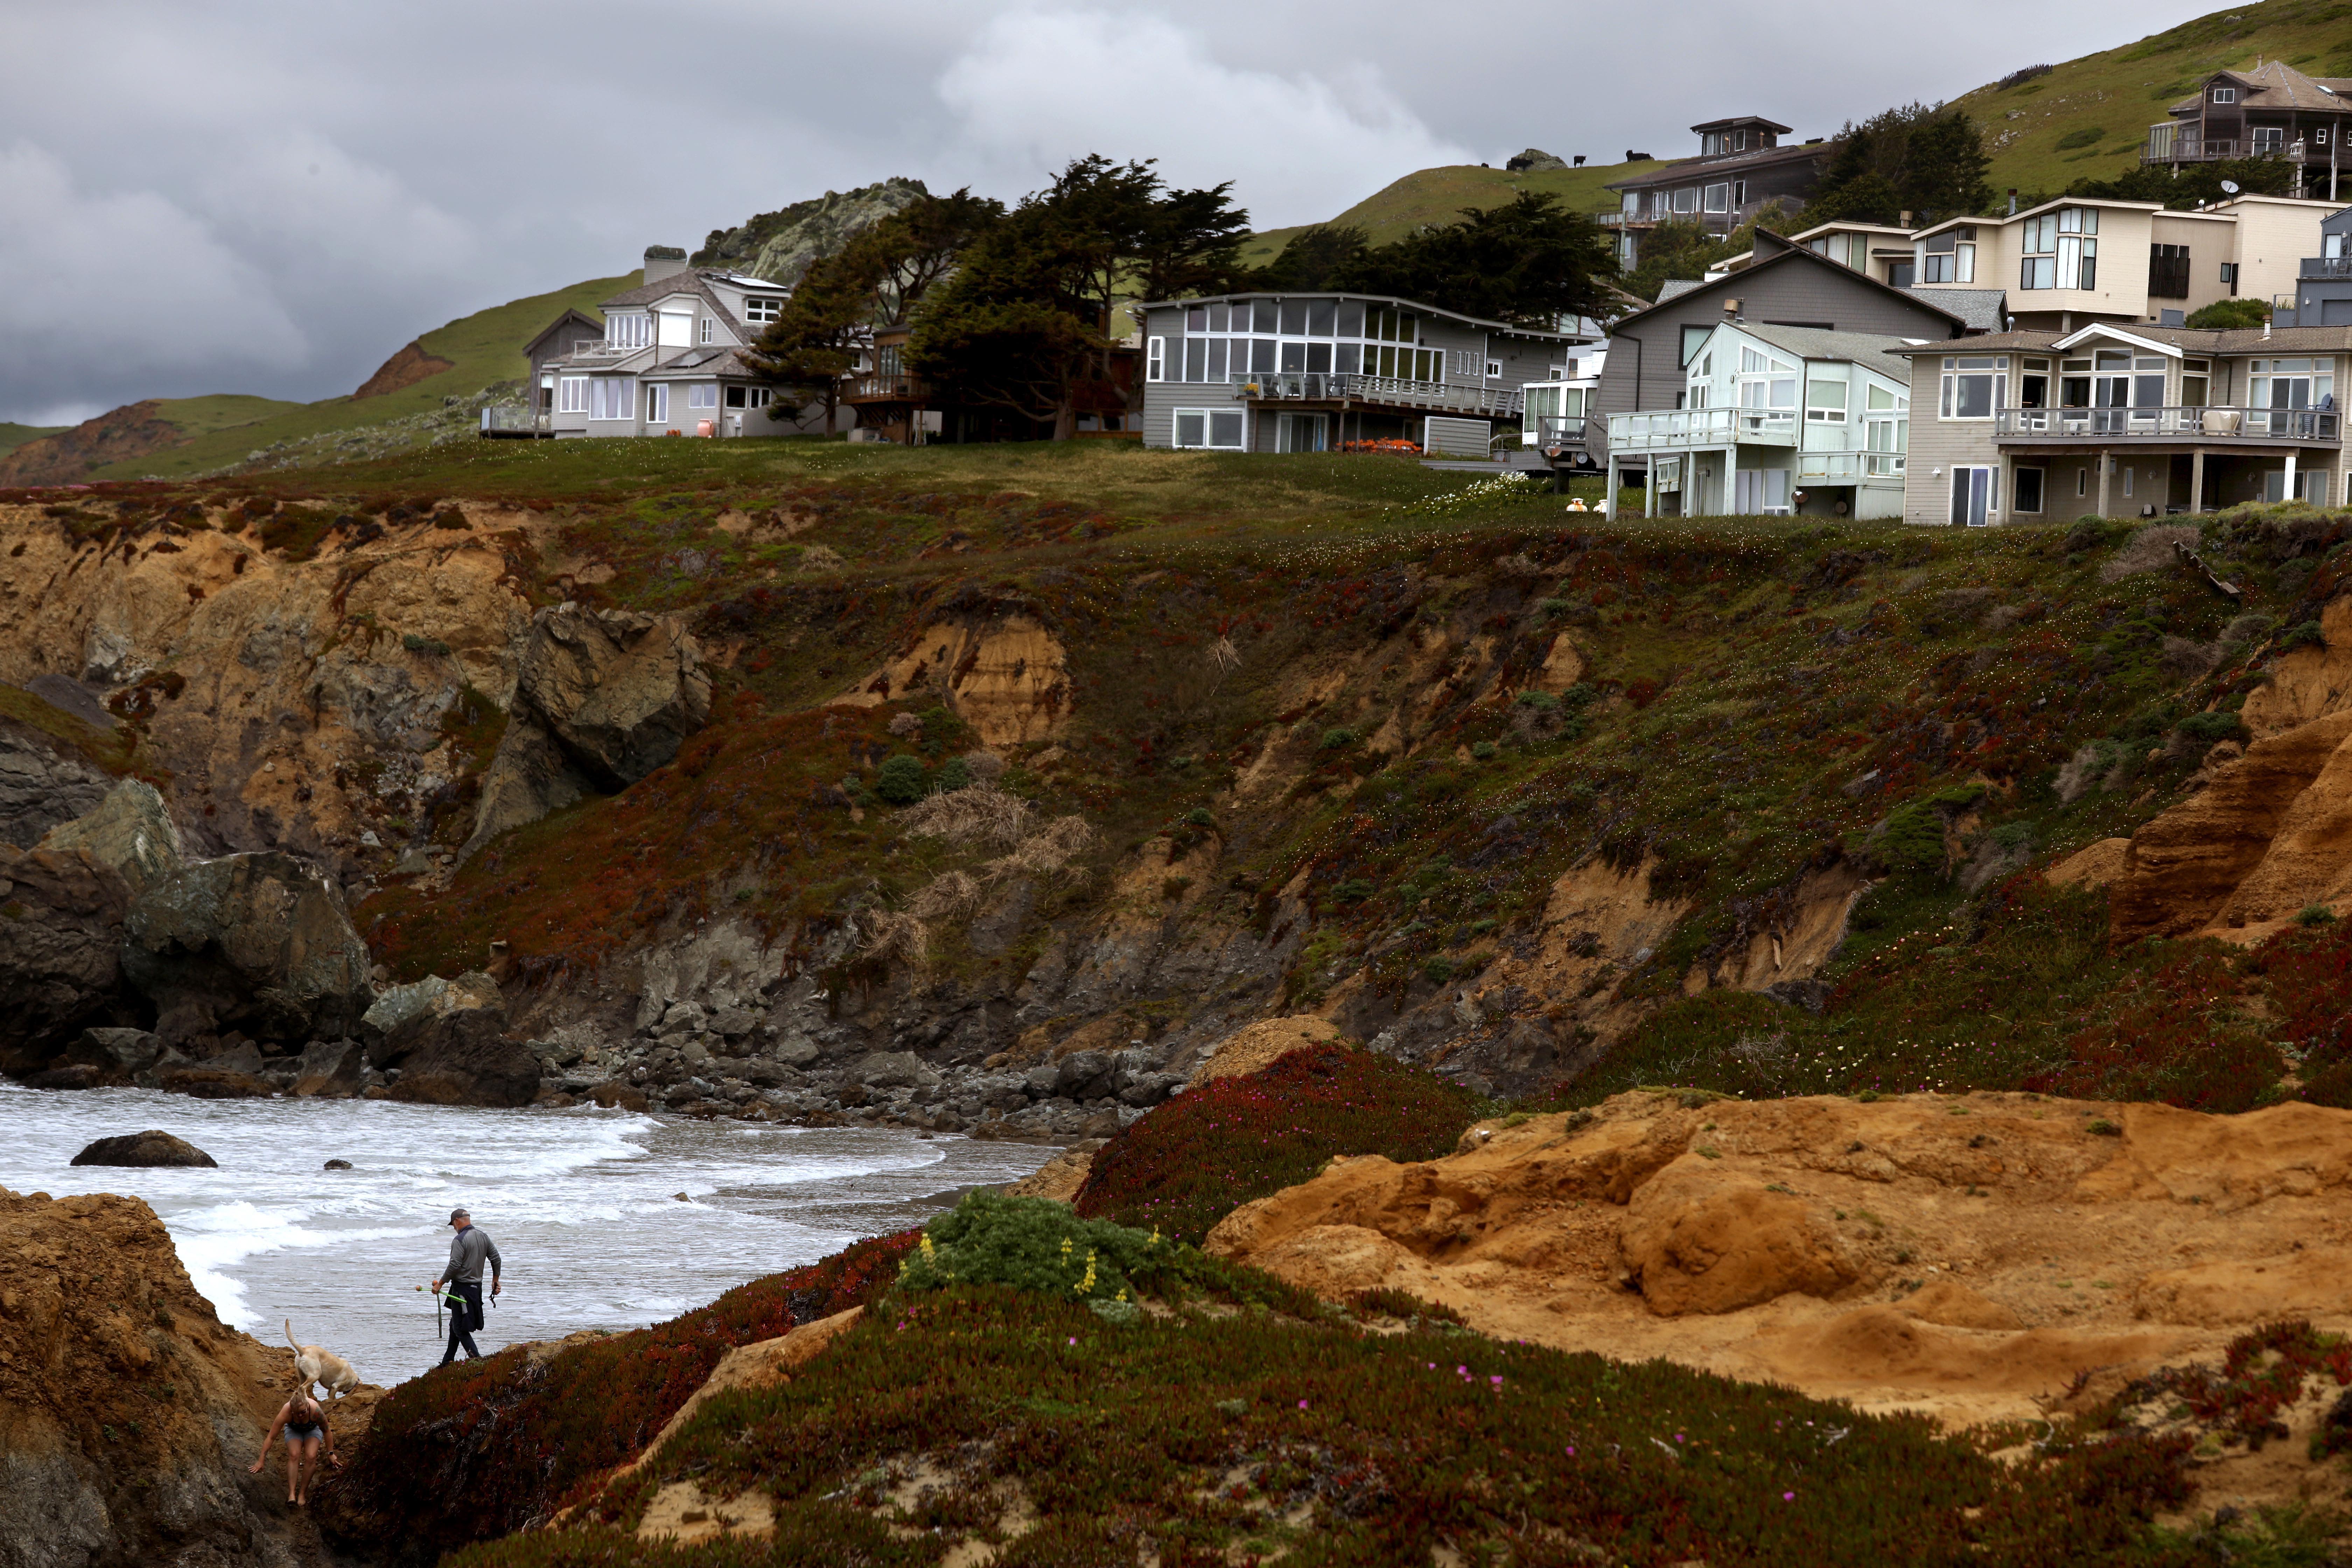 Looking to vacation on the California coast? Marin just made it harder